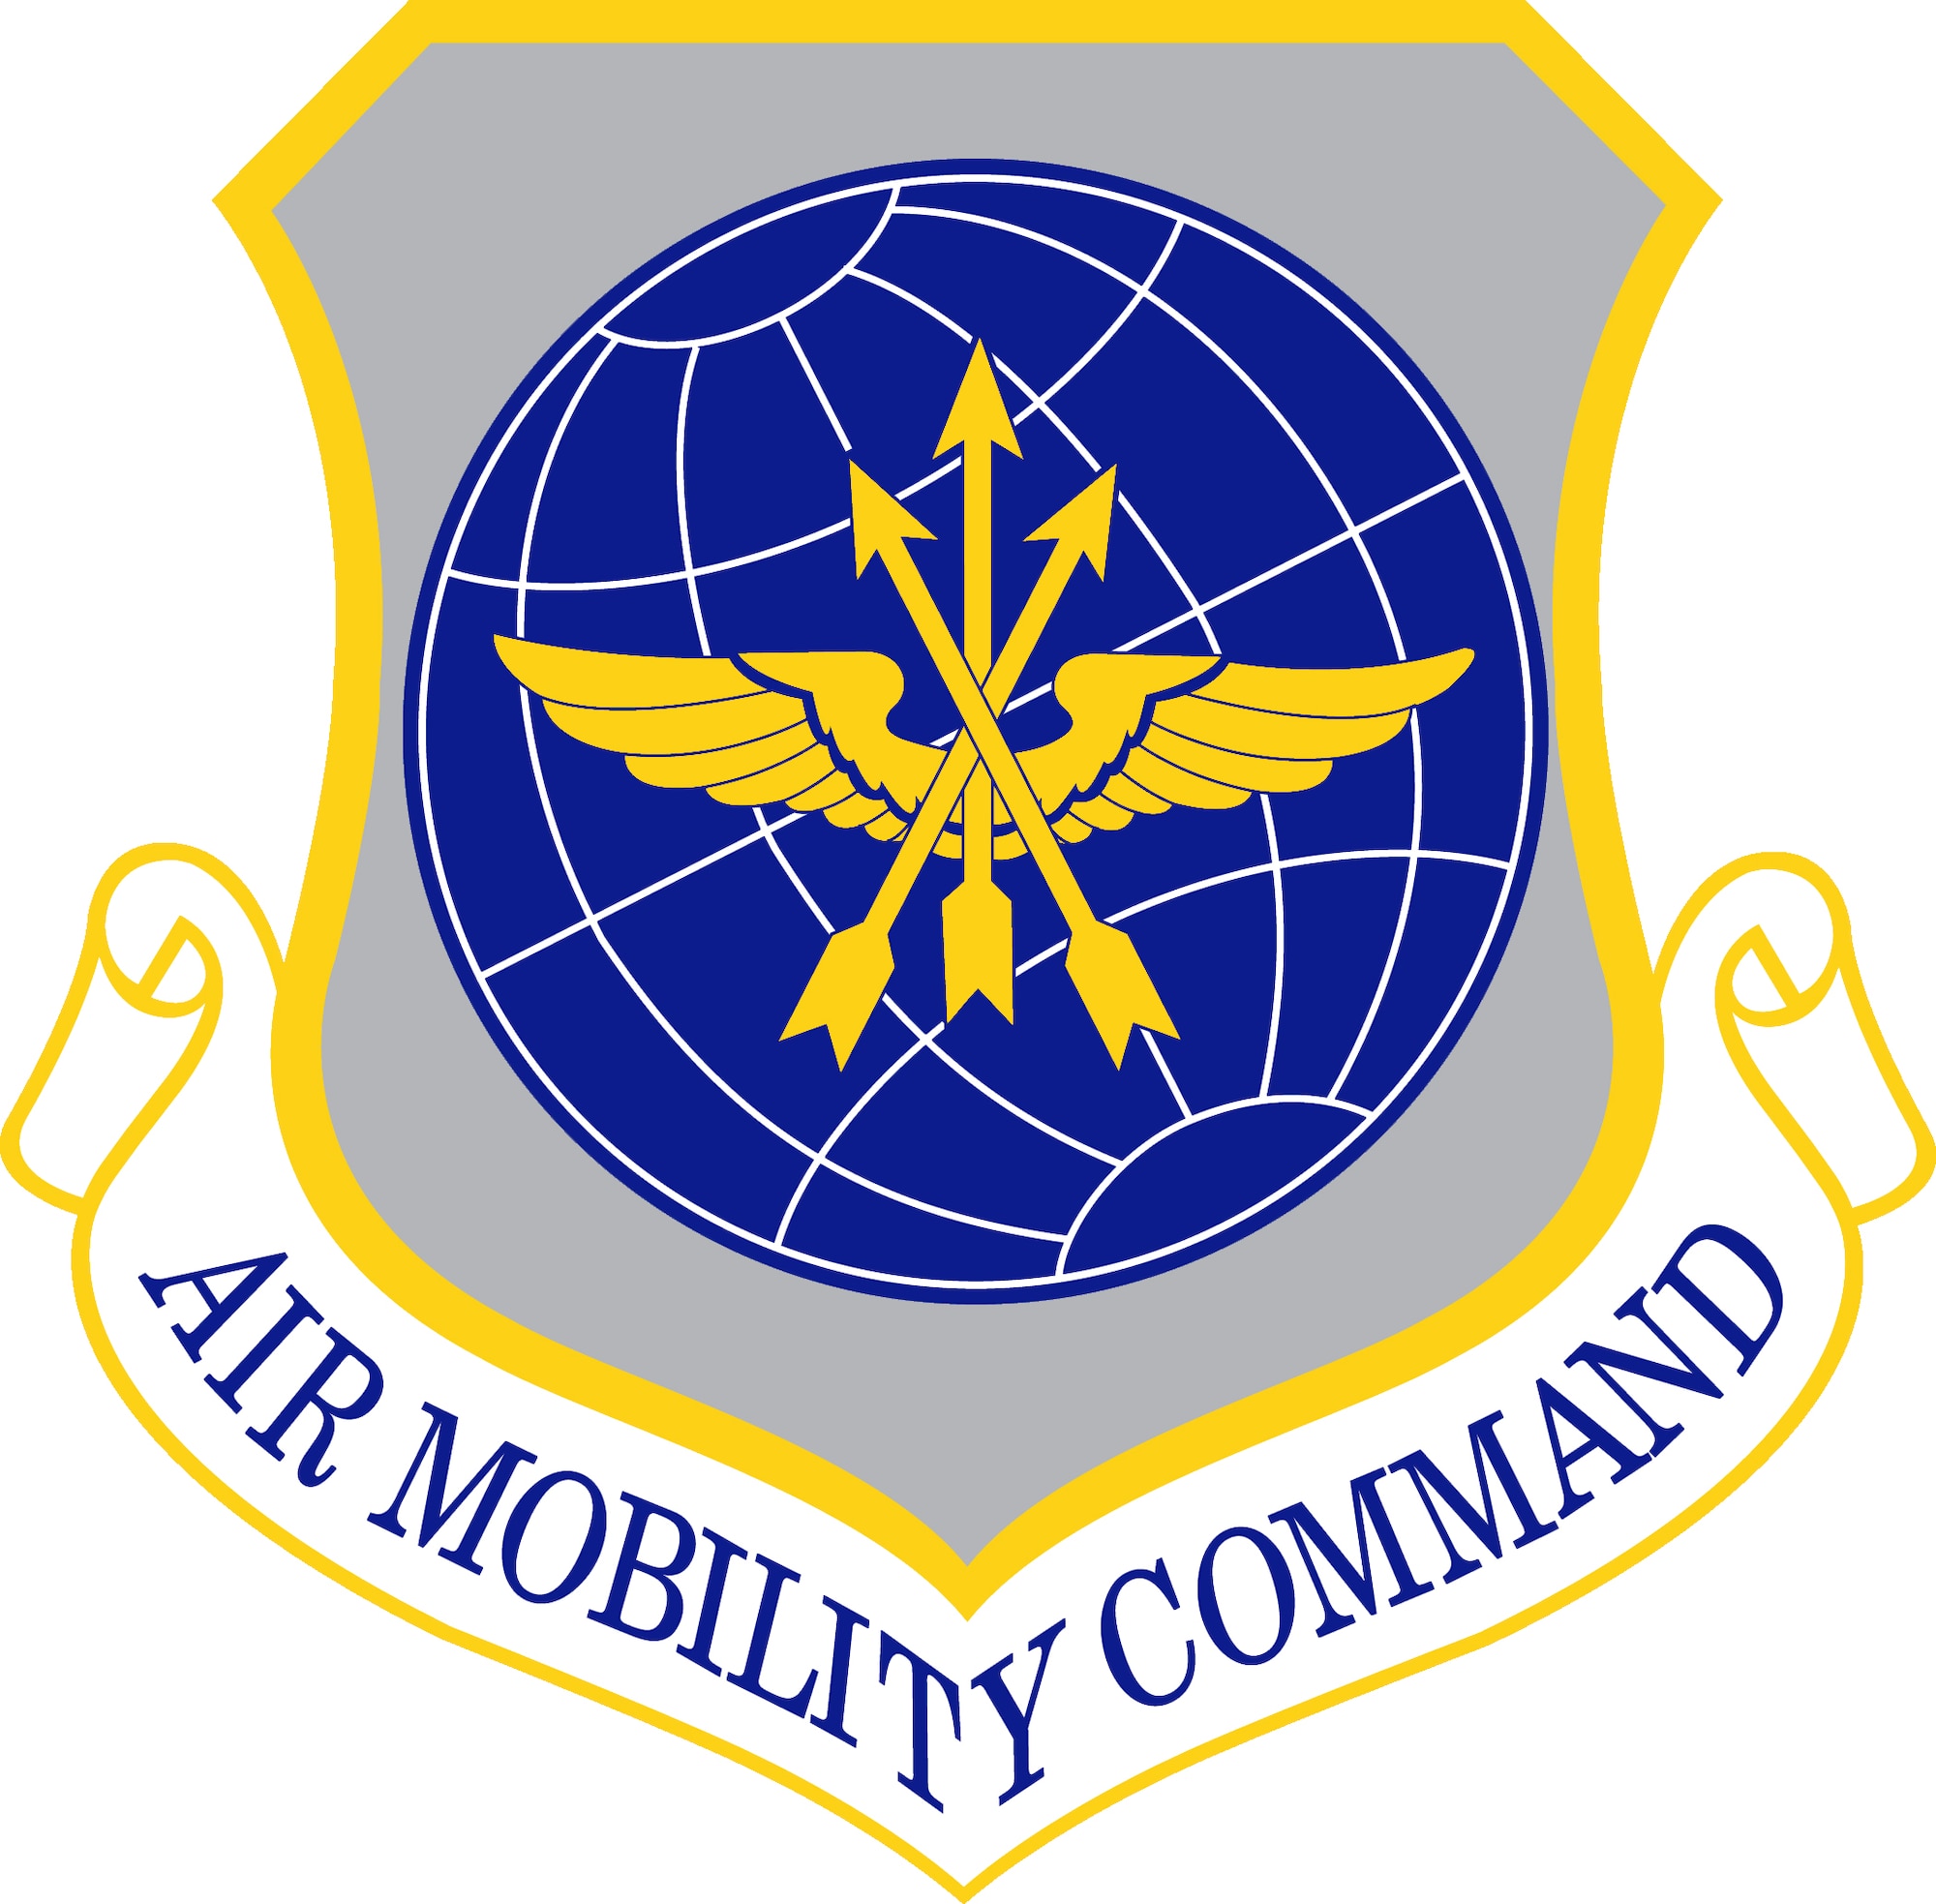 Air Mobility Command, a major command headquartered at Scott Air Force Base, Ill., was created June 1, 1992. AMC provides America's Global Reach. This rapid, flexible and responsive air mobility promotes stability in regions by keeping America's capability and character highly visible. Air Mobility Command's mission is to provide global air mobility ... right effects, right place, right time. (U.S. Air Force graphic)